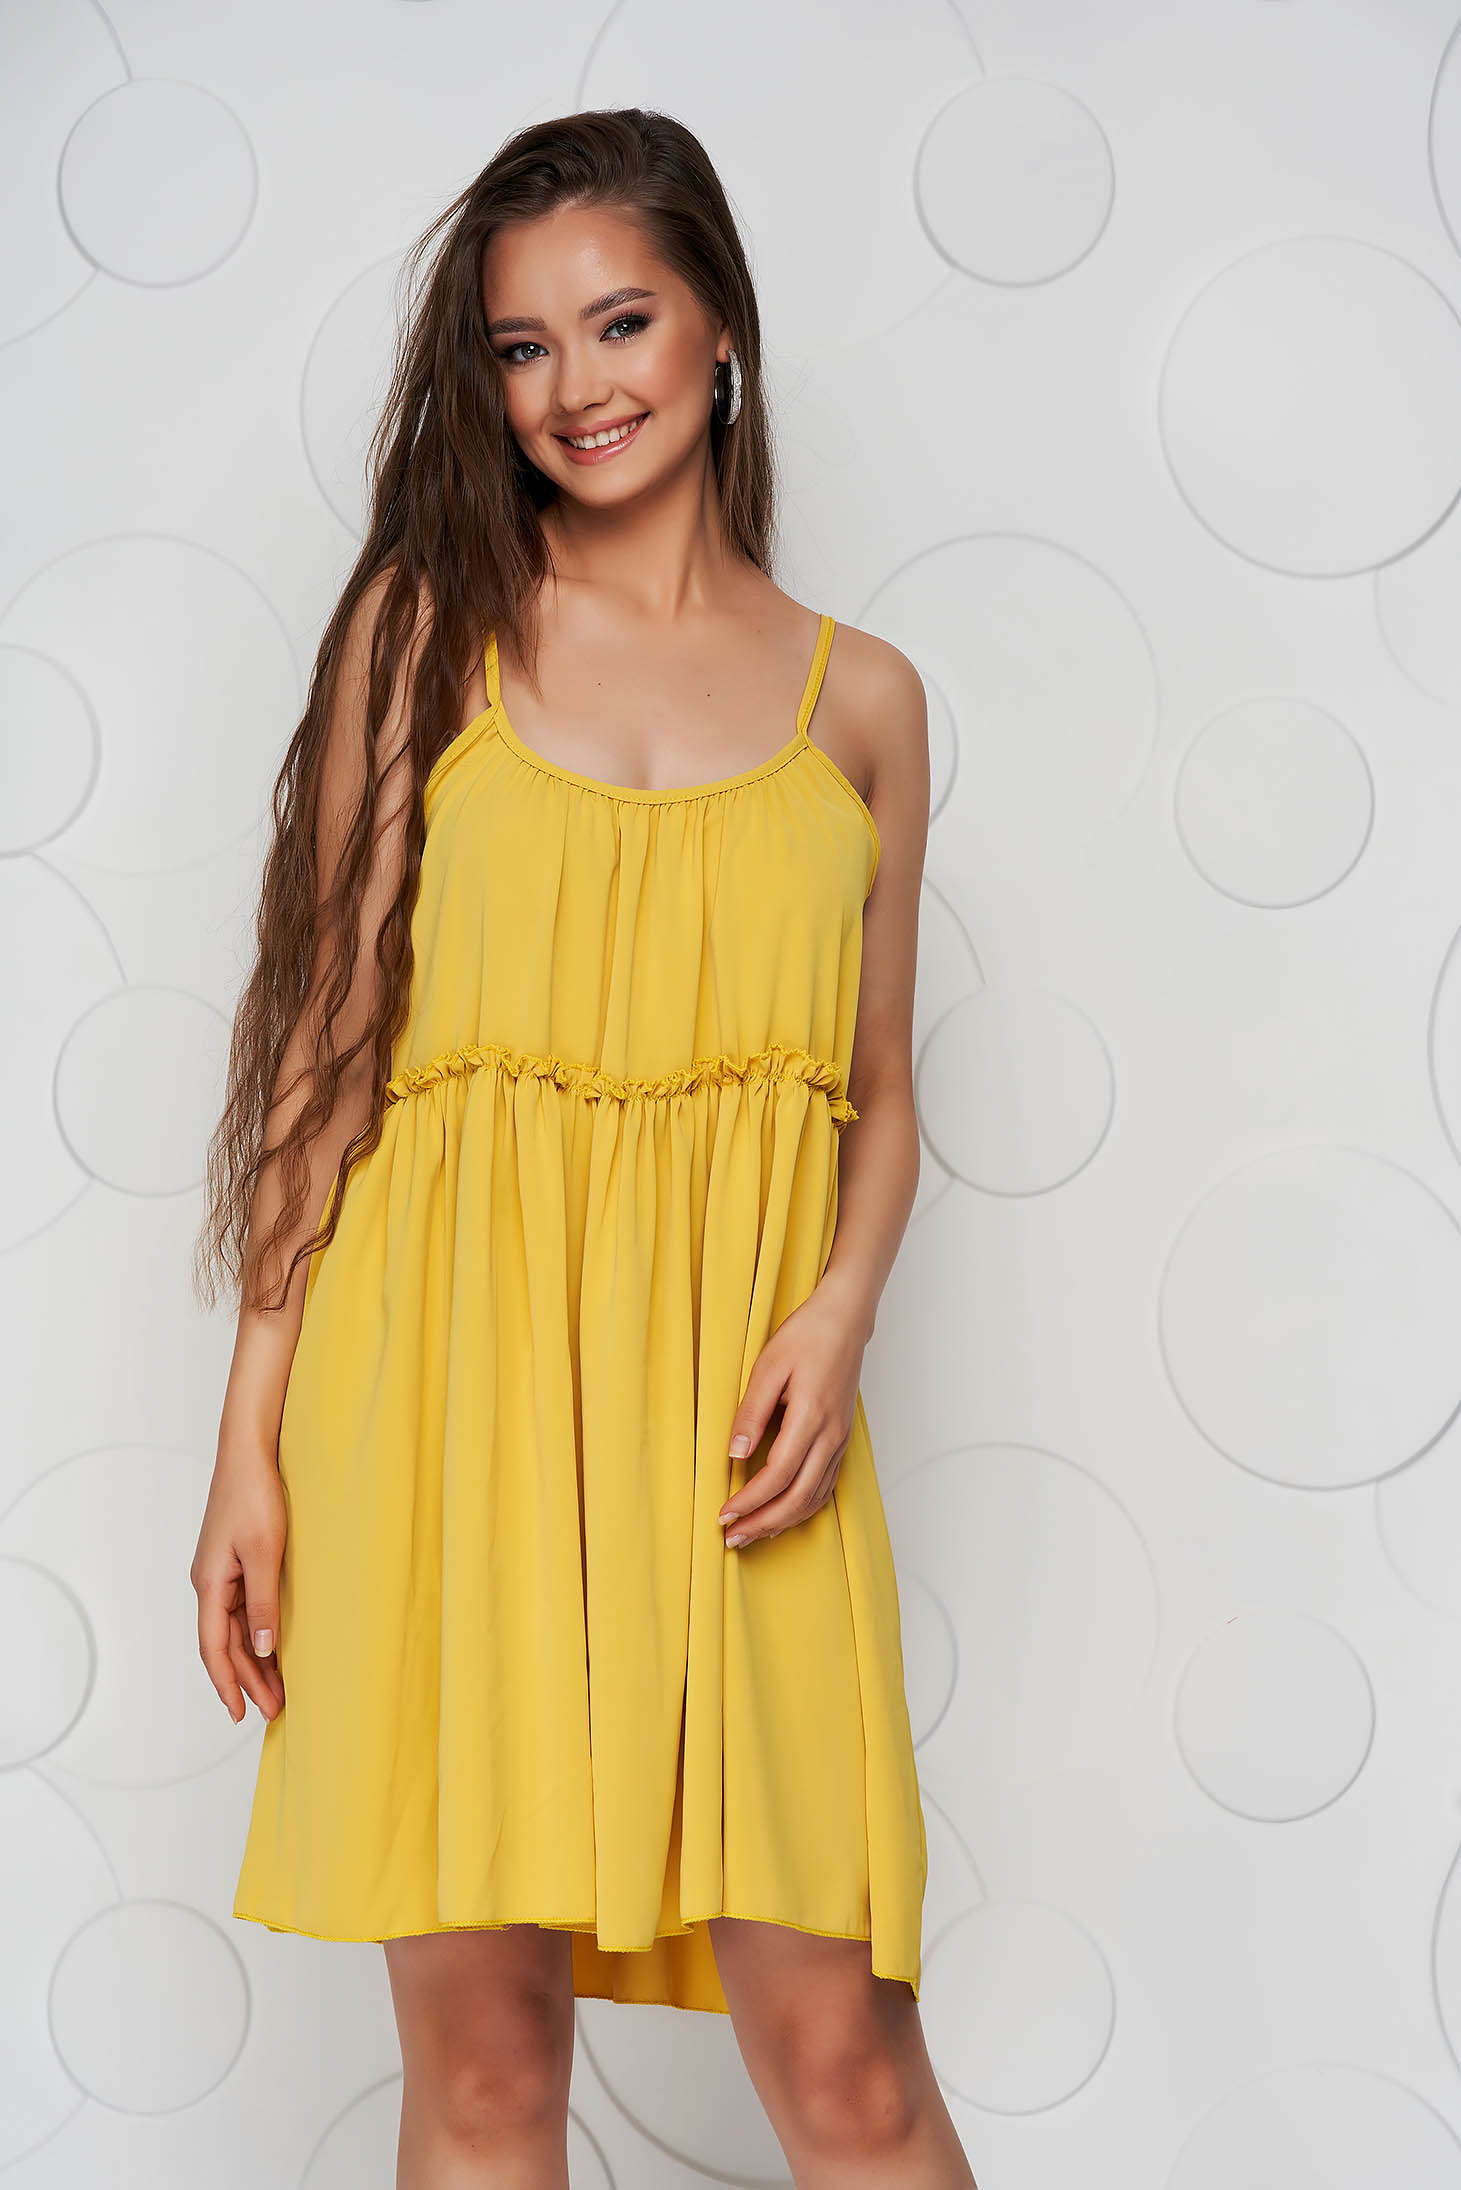 Mustard dress thin fabric loose fit with rounded cleavage